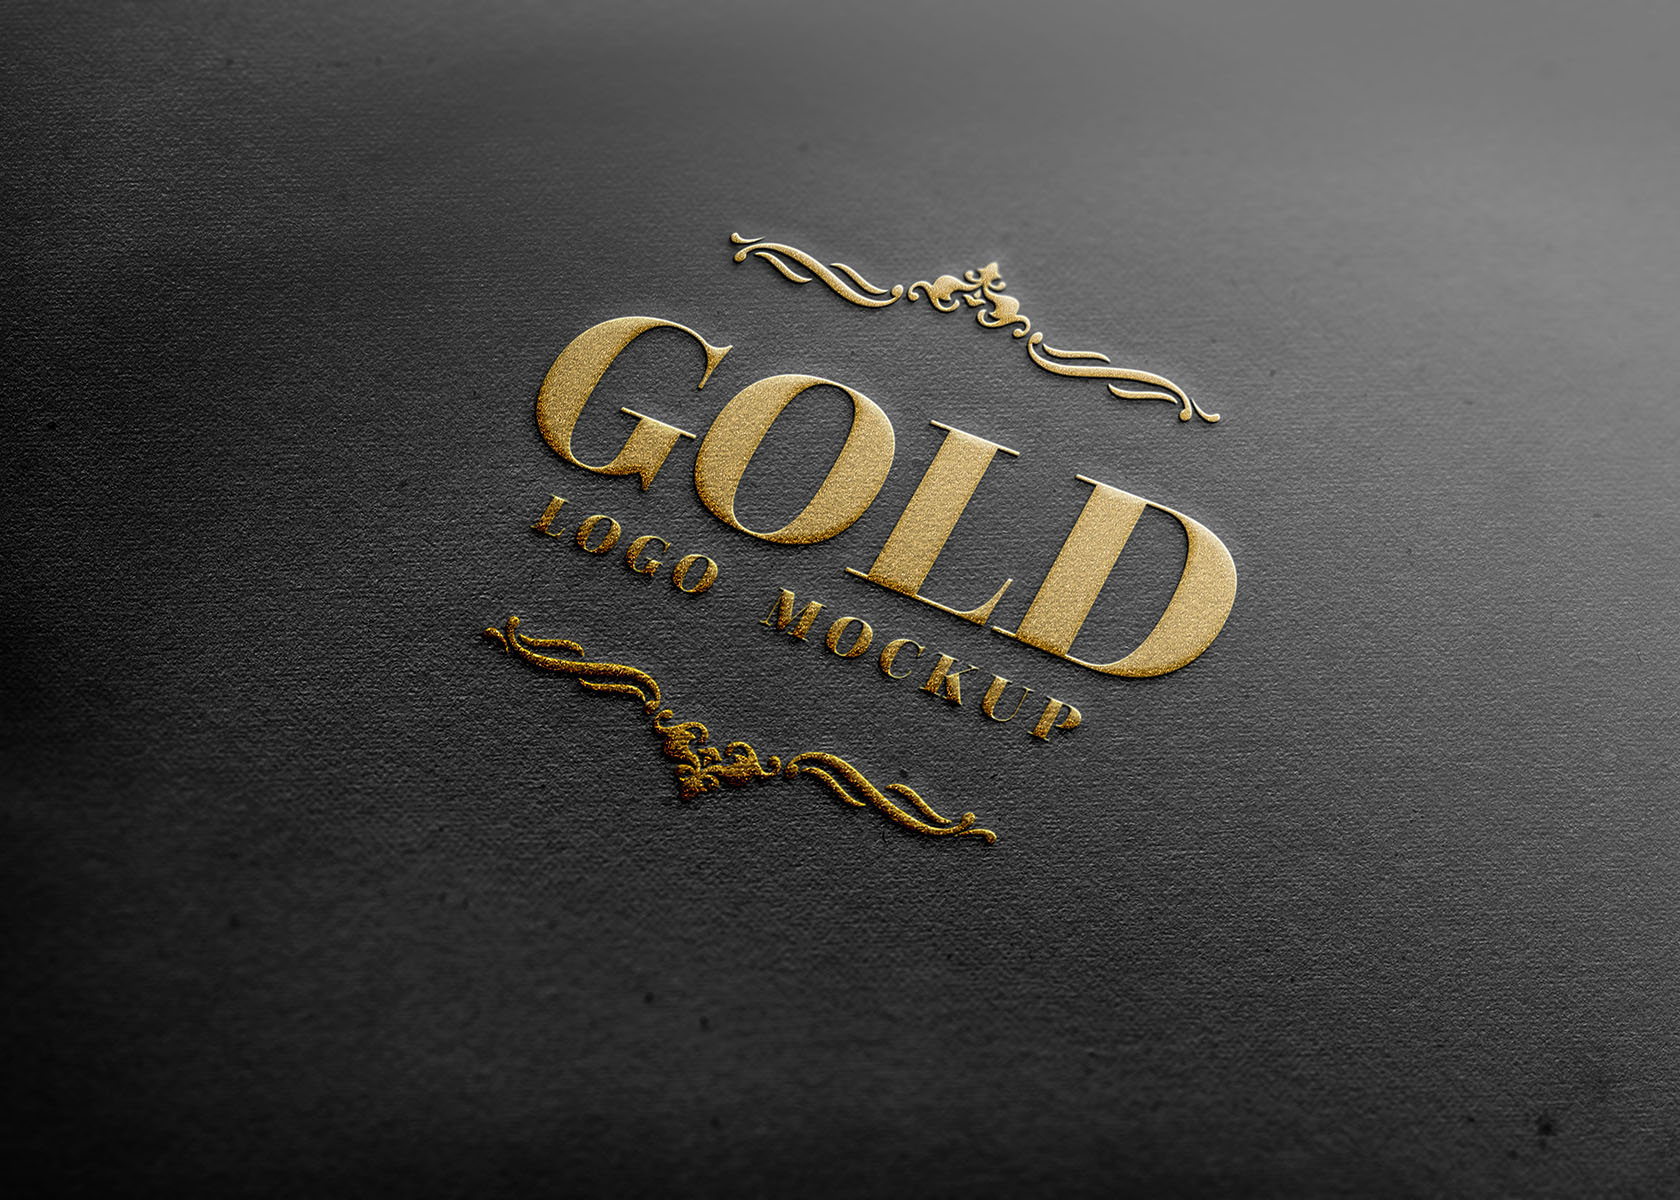 Embossed Gold And Silver Foil Logo Mockup - Graphicsfuel